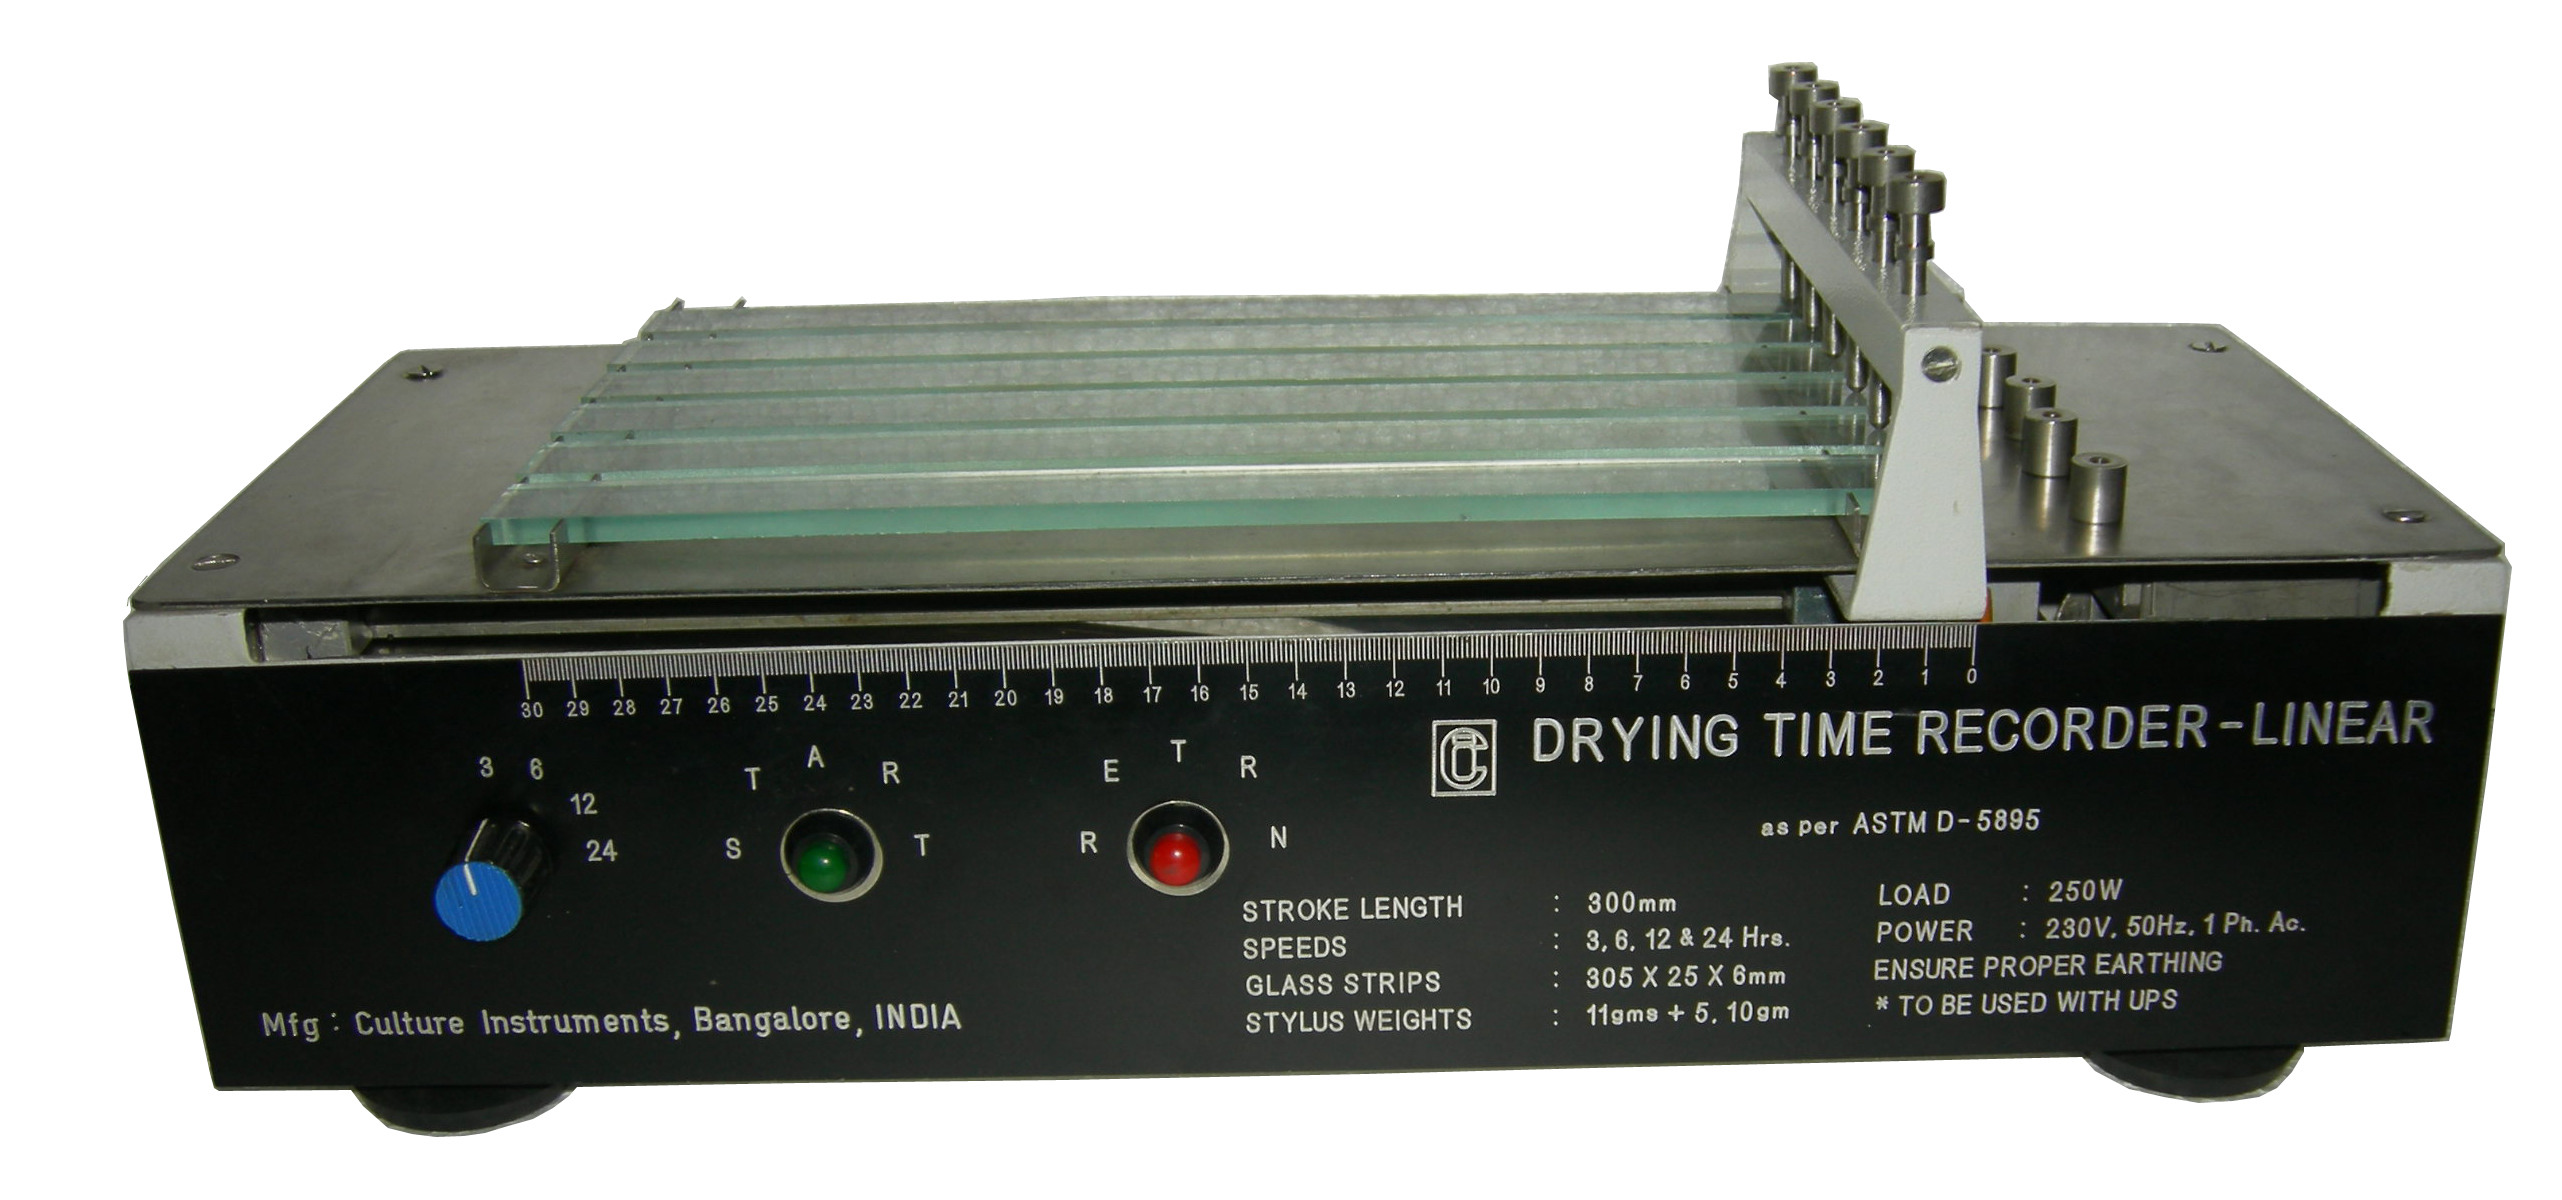 DRYING TIME RECORDER-LINEAR